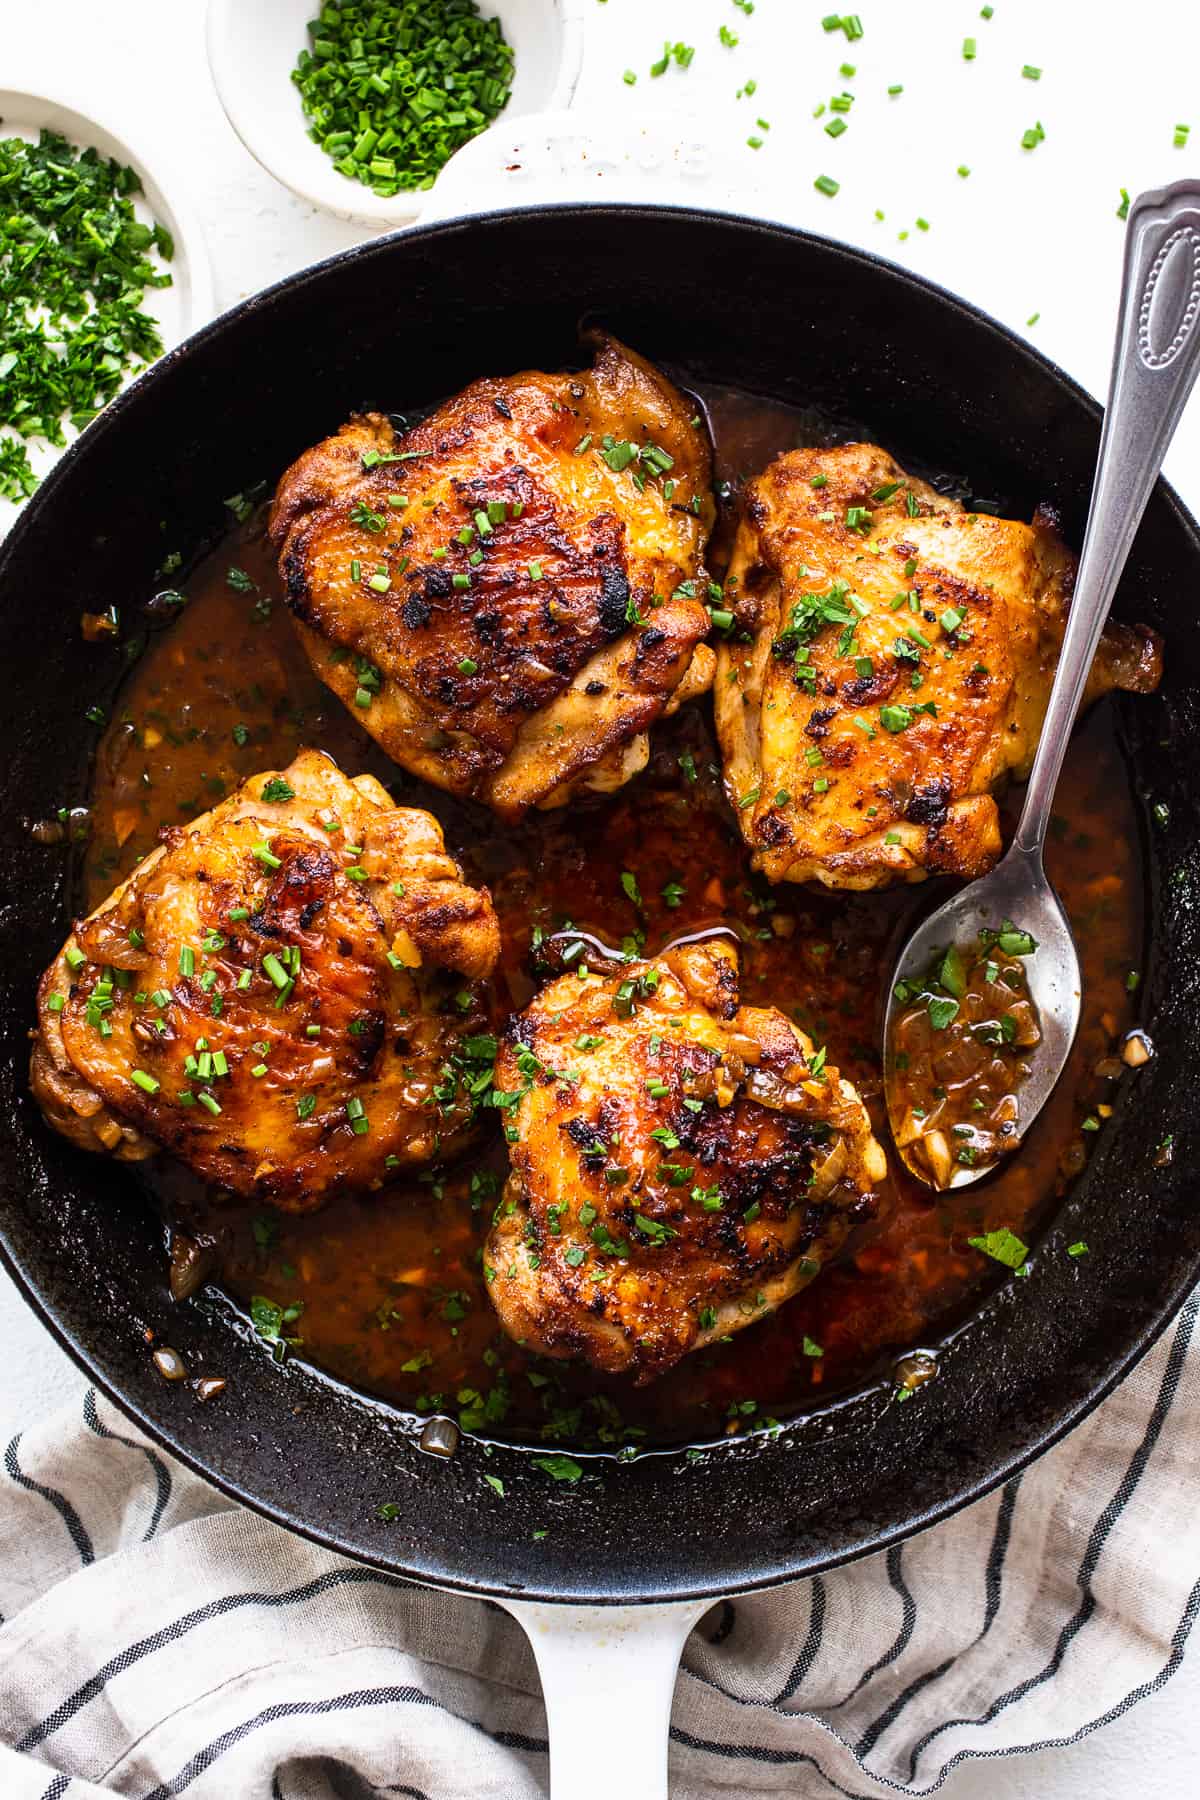 https://fitfoodiefinds.com/wp-content/uploads/2023/05/Cast-Iron-Chicken-Thighs-3.jpg